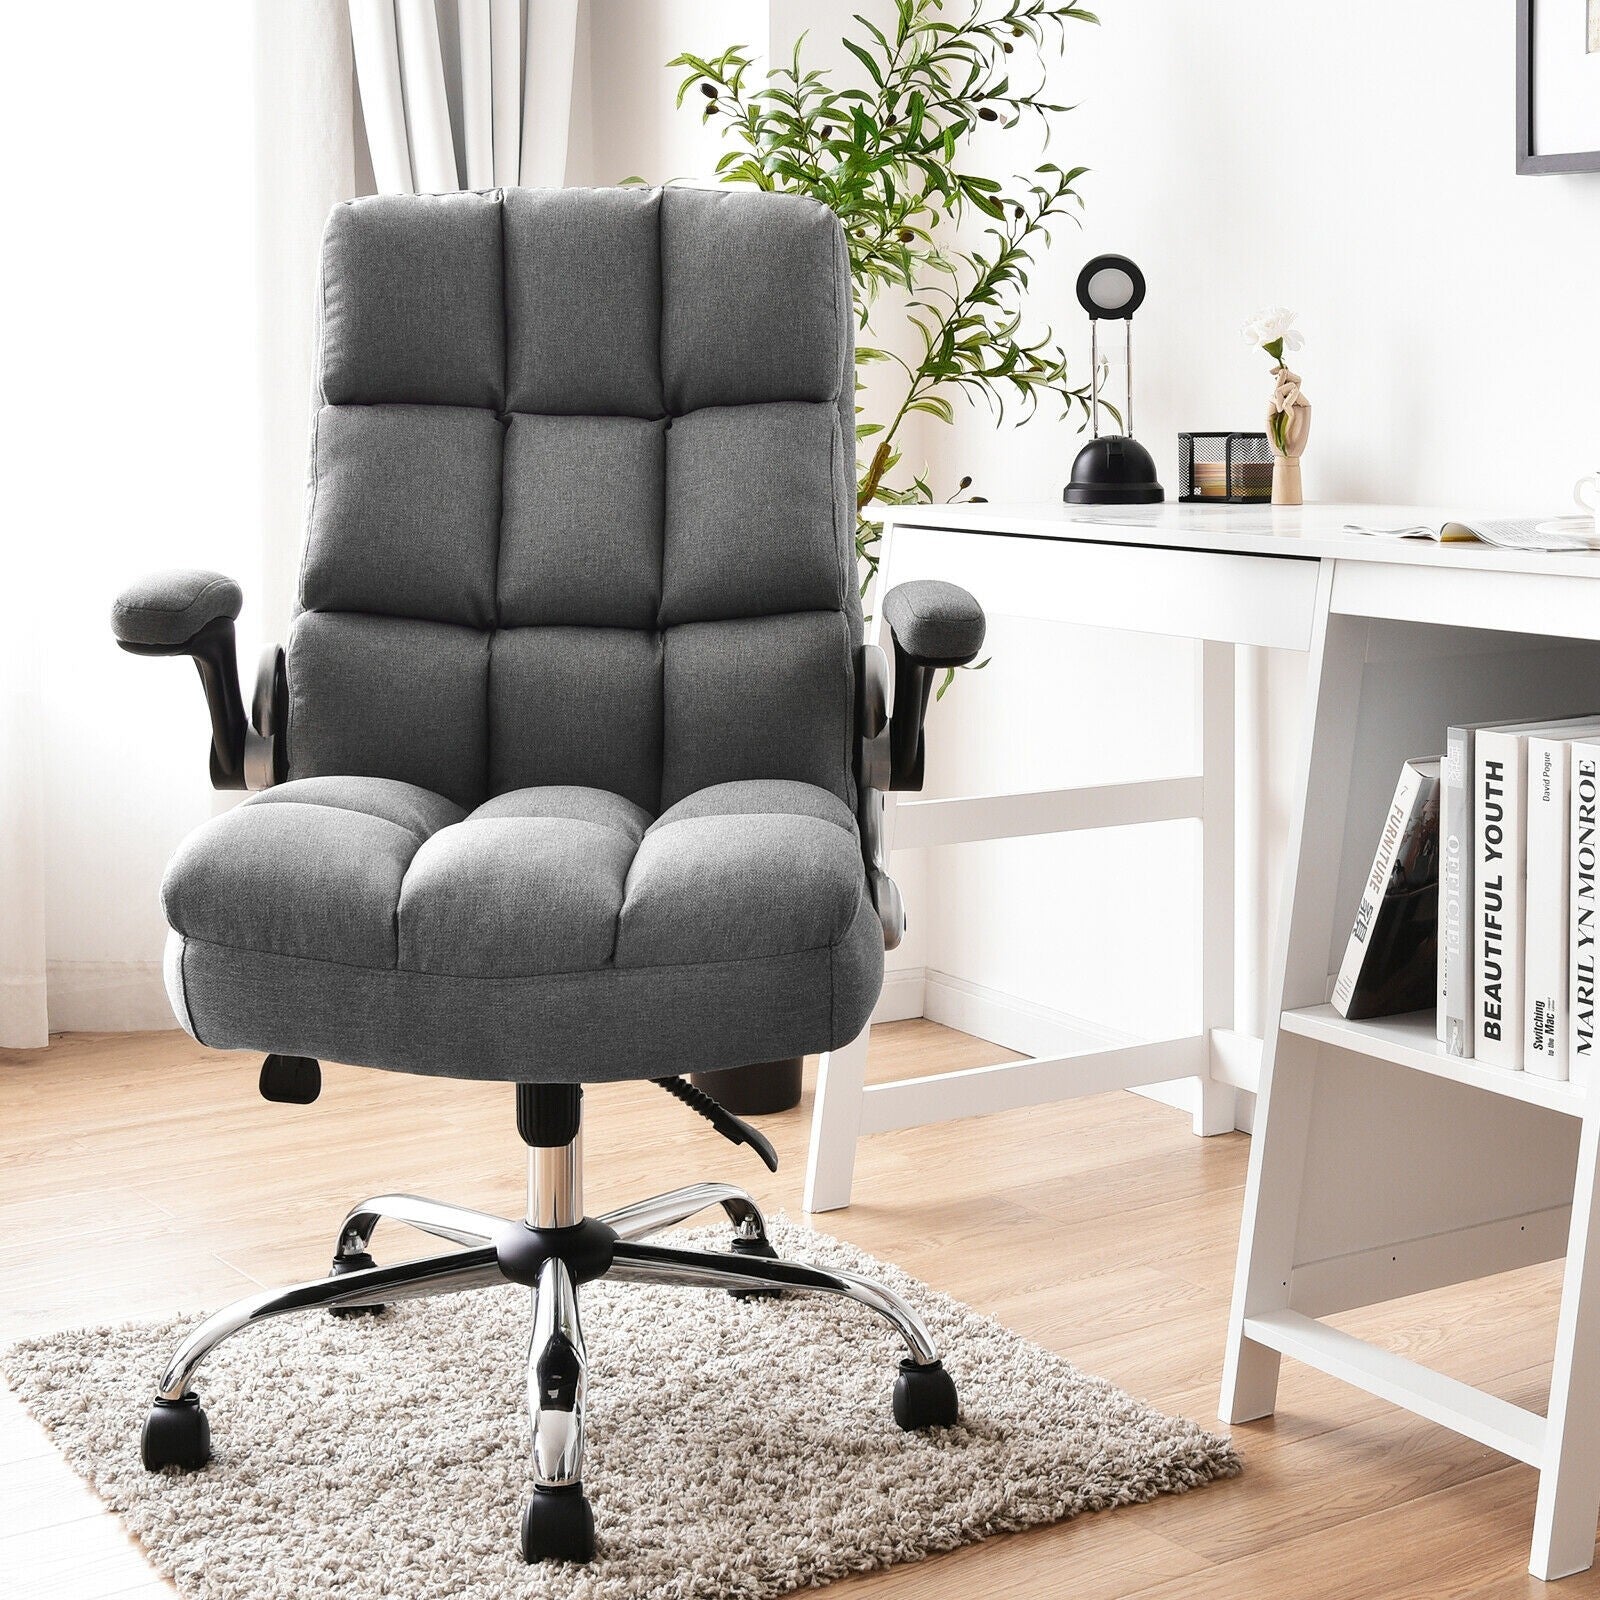 Keypoints to Keep in Mind to Match An Office Chair